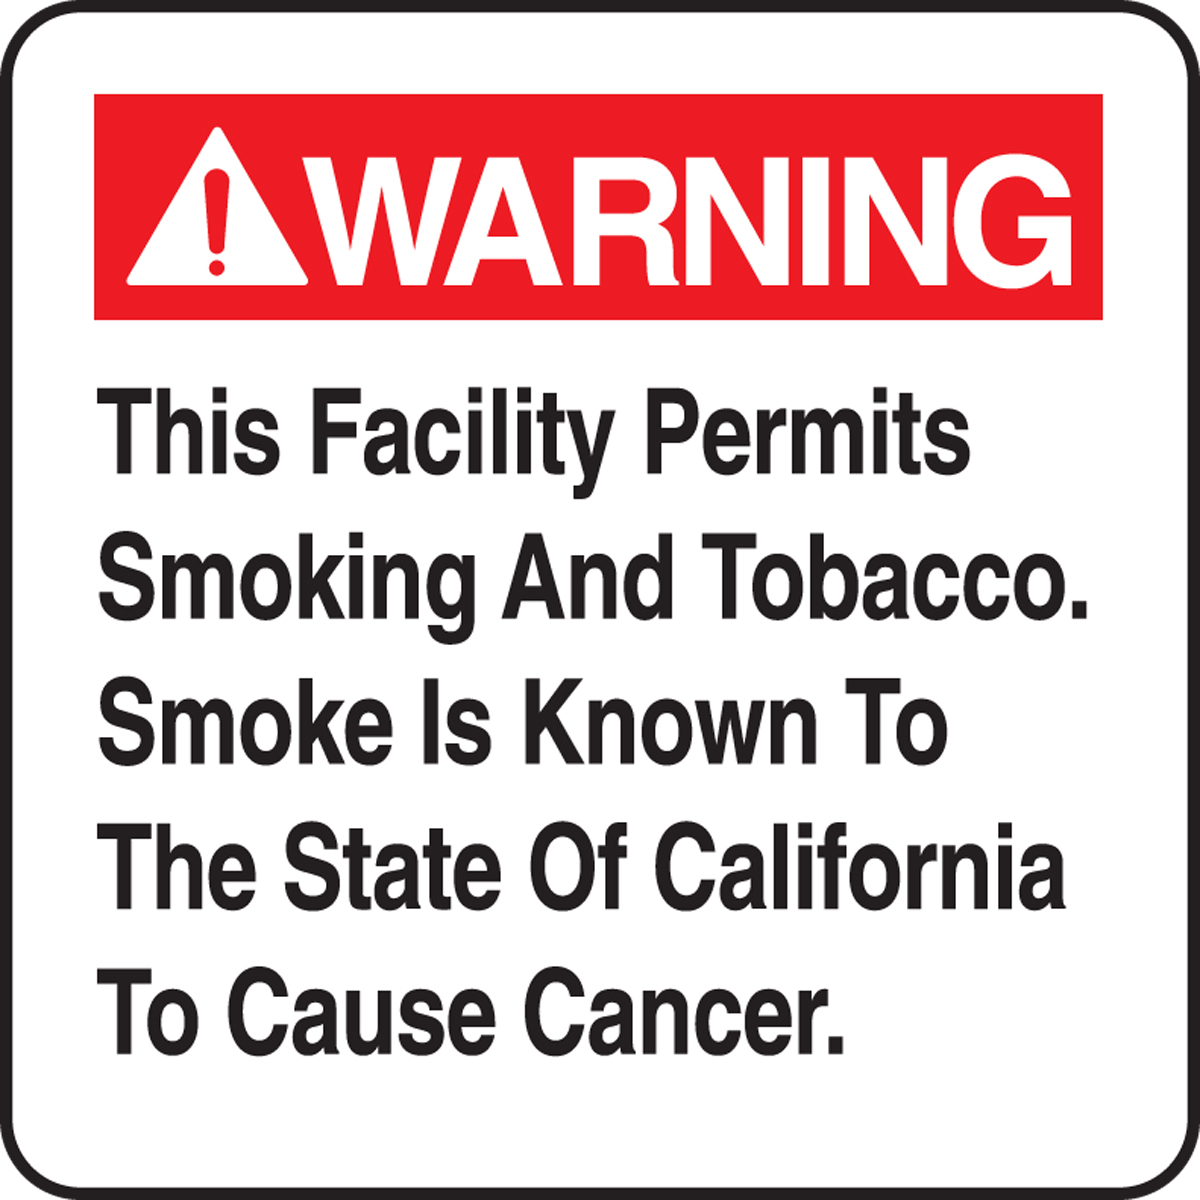 THIS FACILITY PERMITS SMOKING AND TOBACCO. SMOKE IS KNOWN TO THE STATE OF CALIFORNIA TO CAUSE CANCER